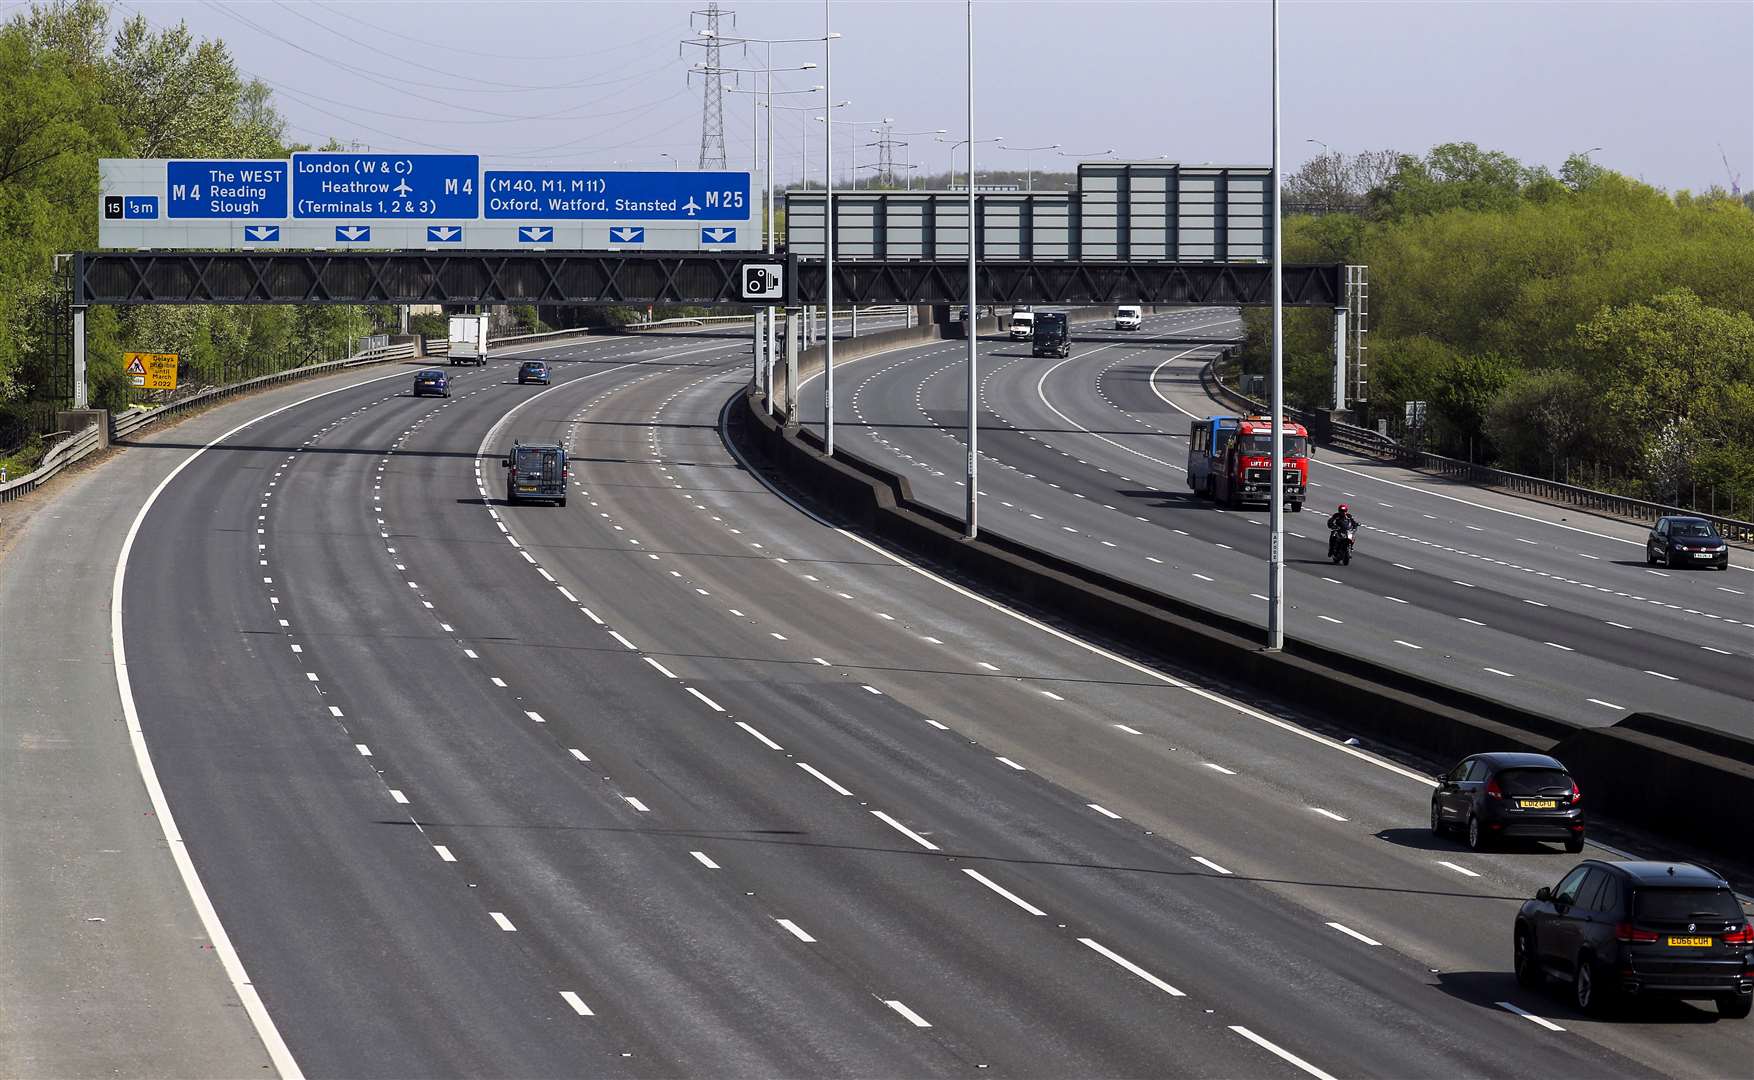 A view of the M25 motorway near Heathrow during lockdown (Steve Parsons/PA)